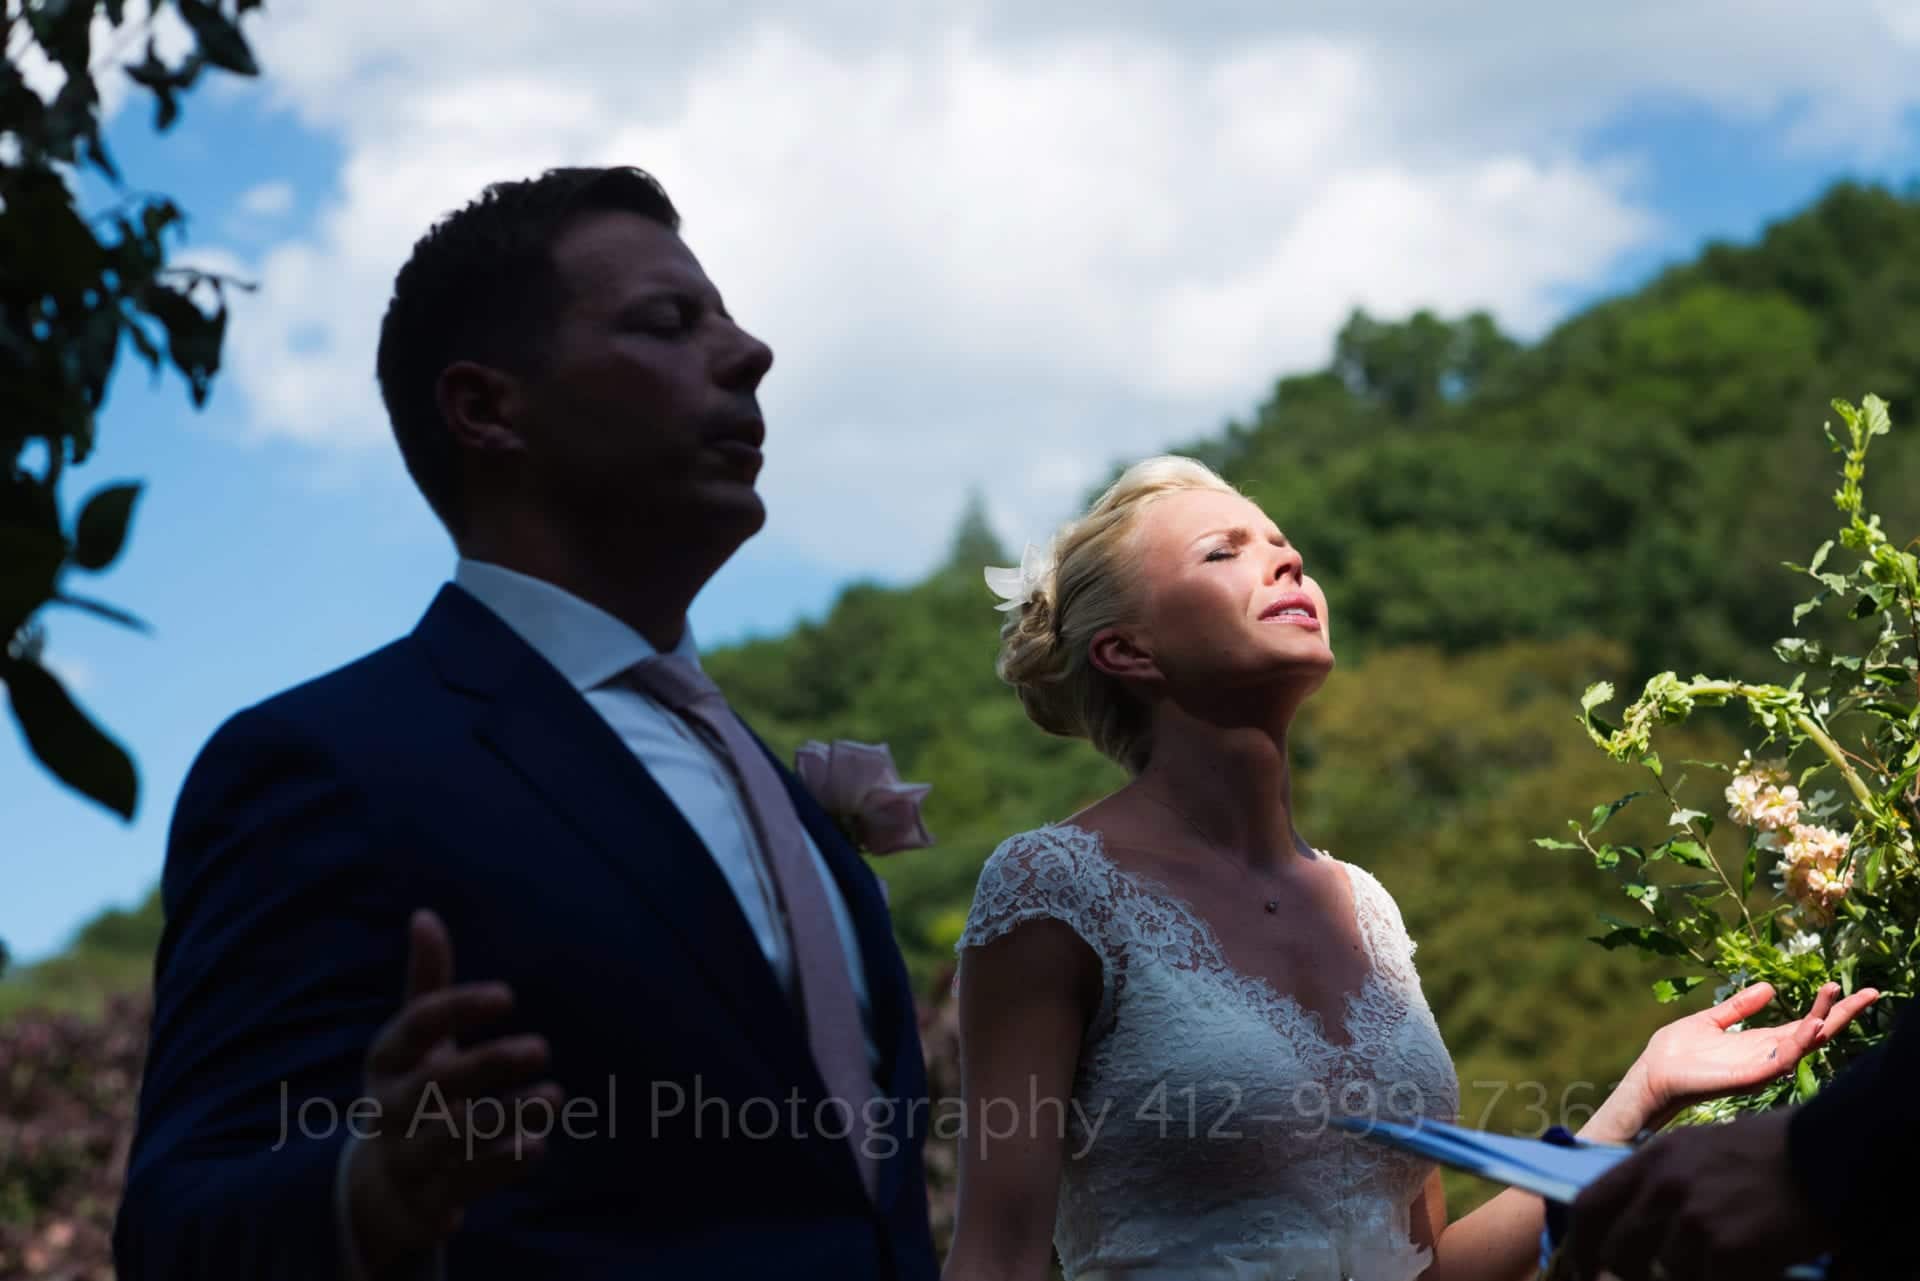 A groom stands in shadow as sunlight illuminates his bride's face while they face forward in prayer looking at the sky during their Omni Bedford Springs Resort Wedding.